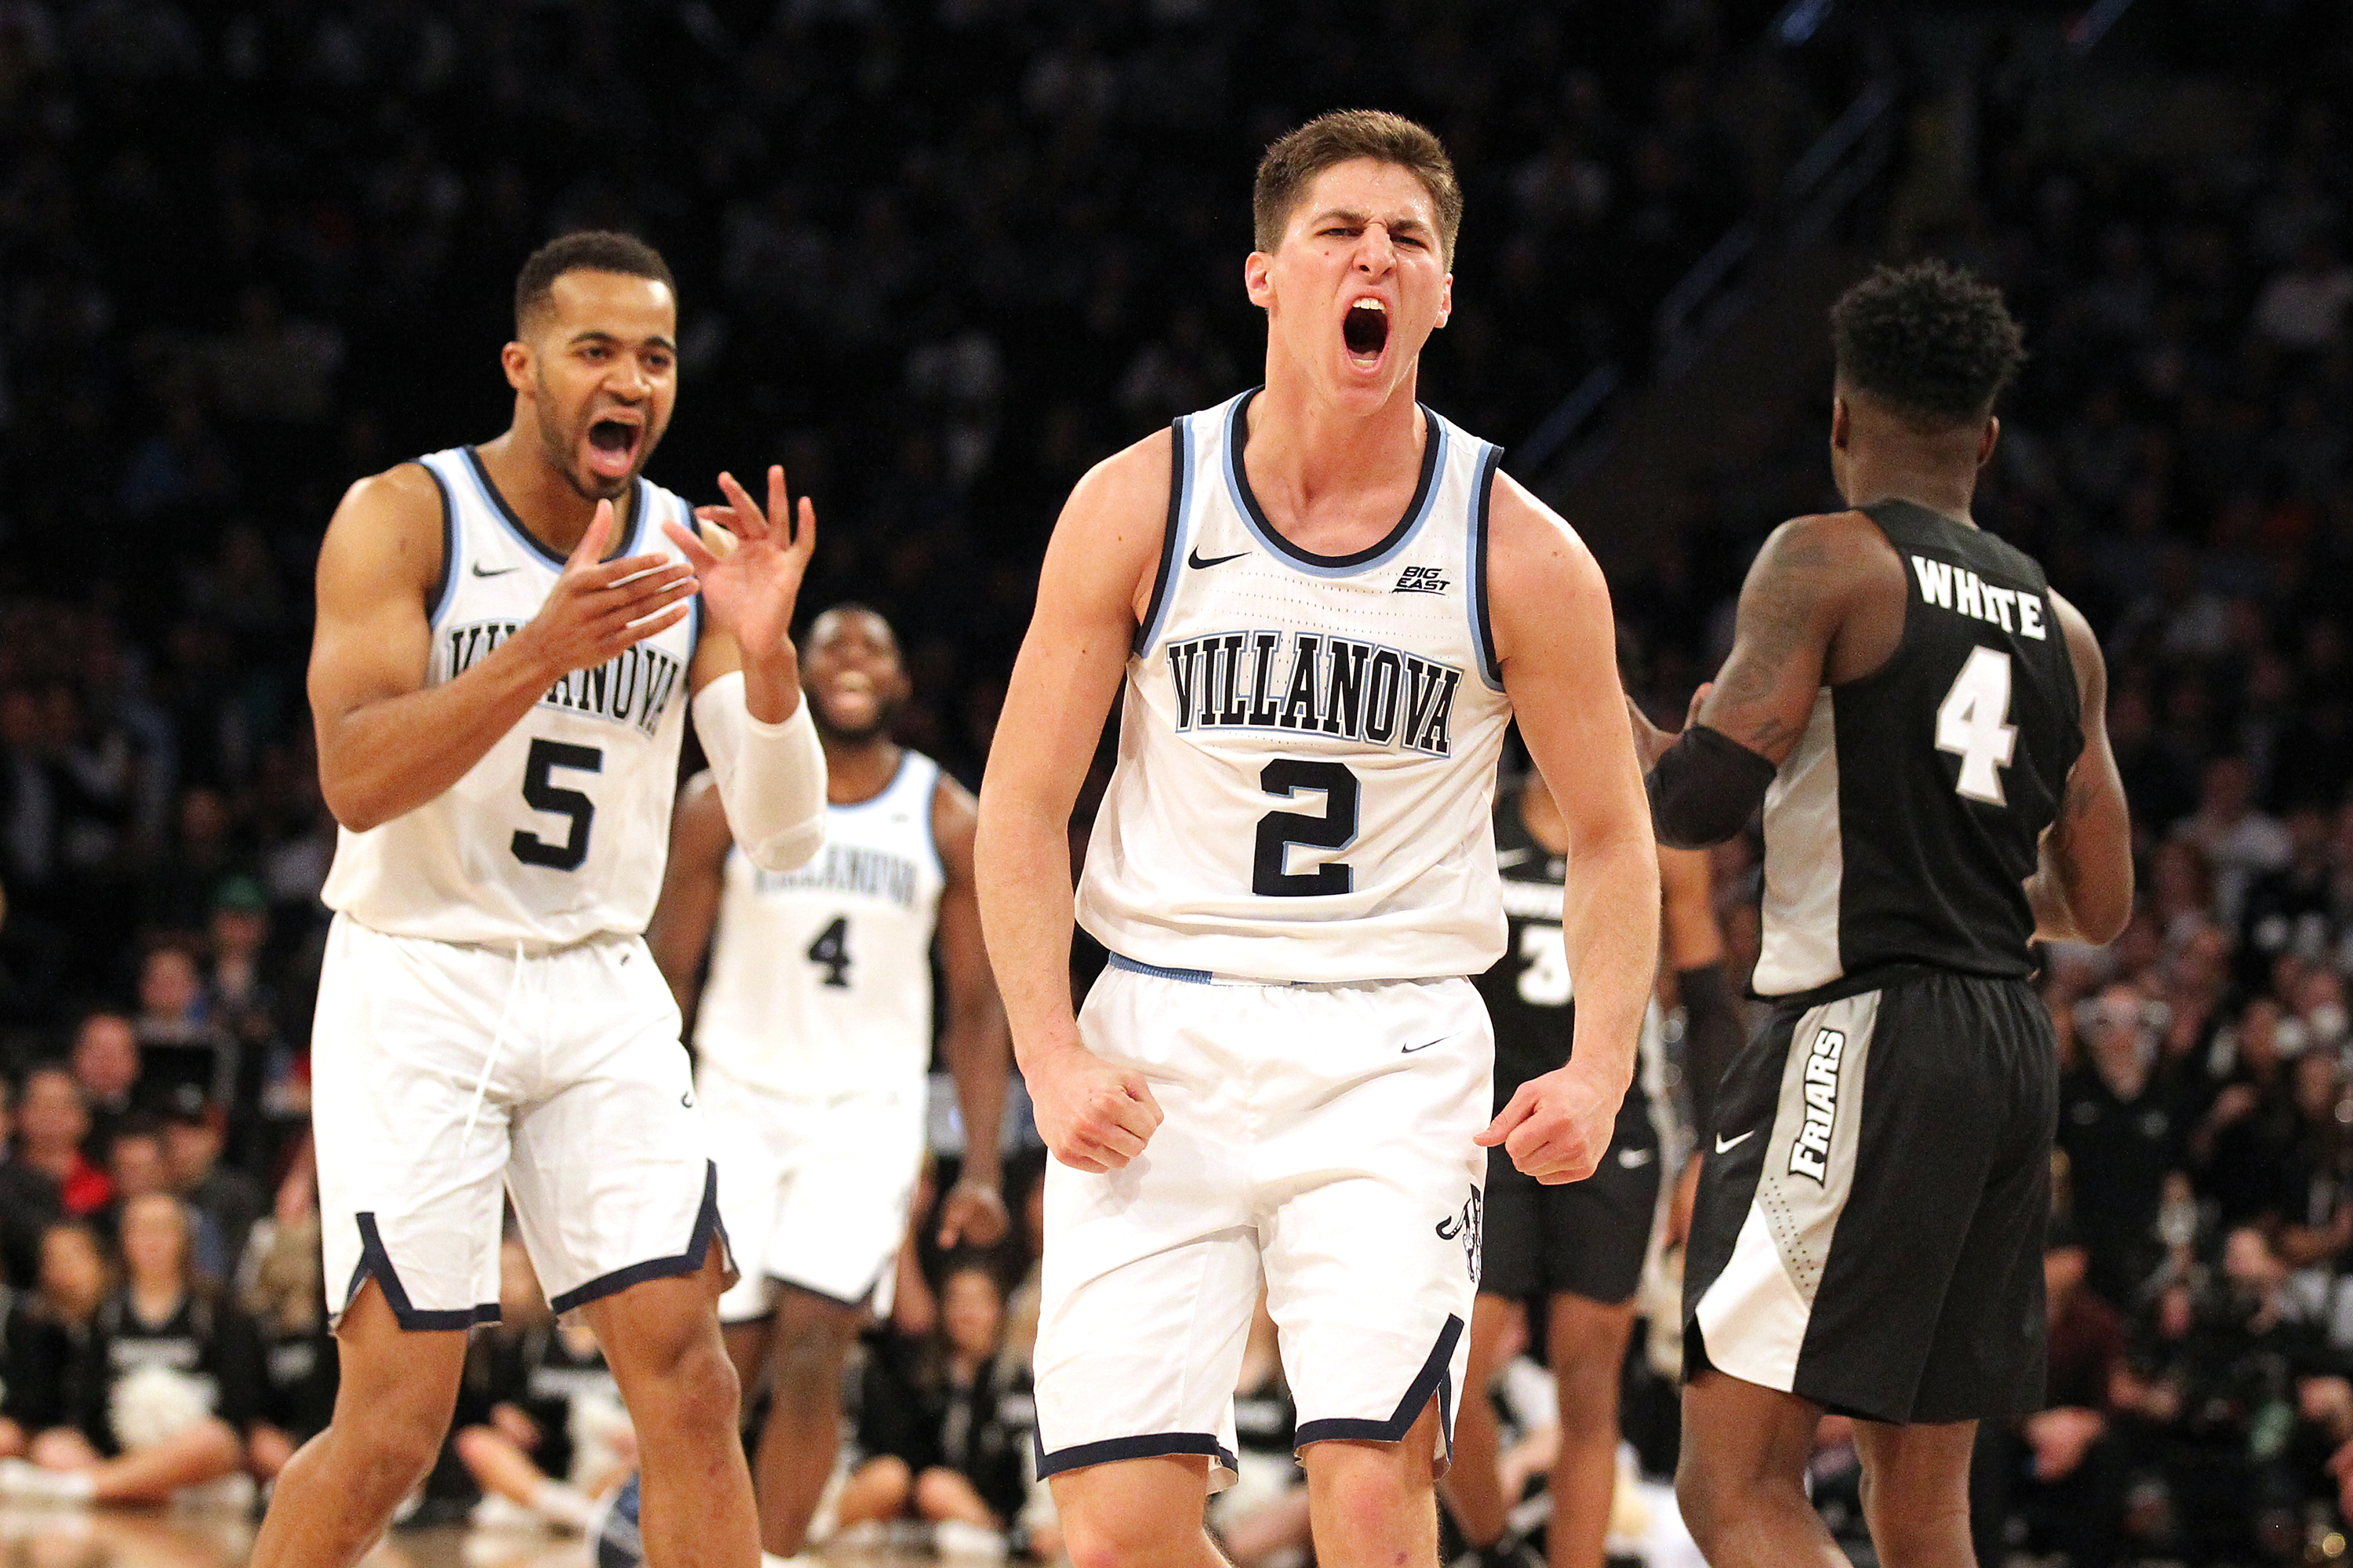 Collin Gillespie learned his lessons well to become one of the toughest  players and strongest leaders at Villanova